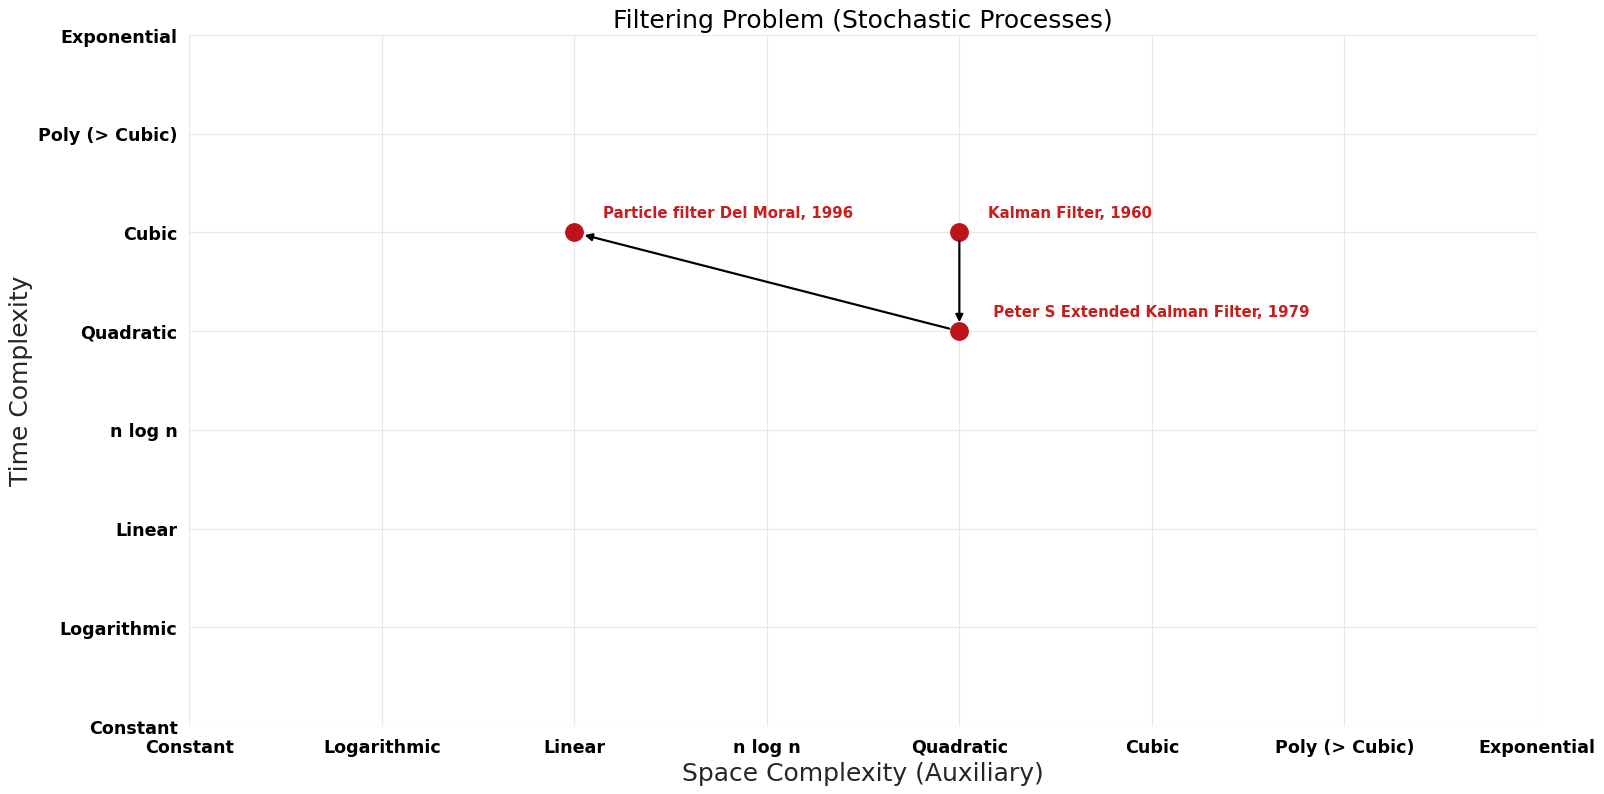 Filtering Problem (Stochastic Processes) - Pareto Frontier.png